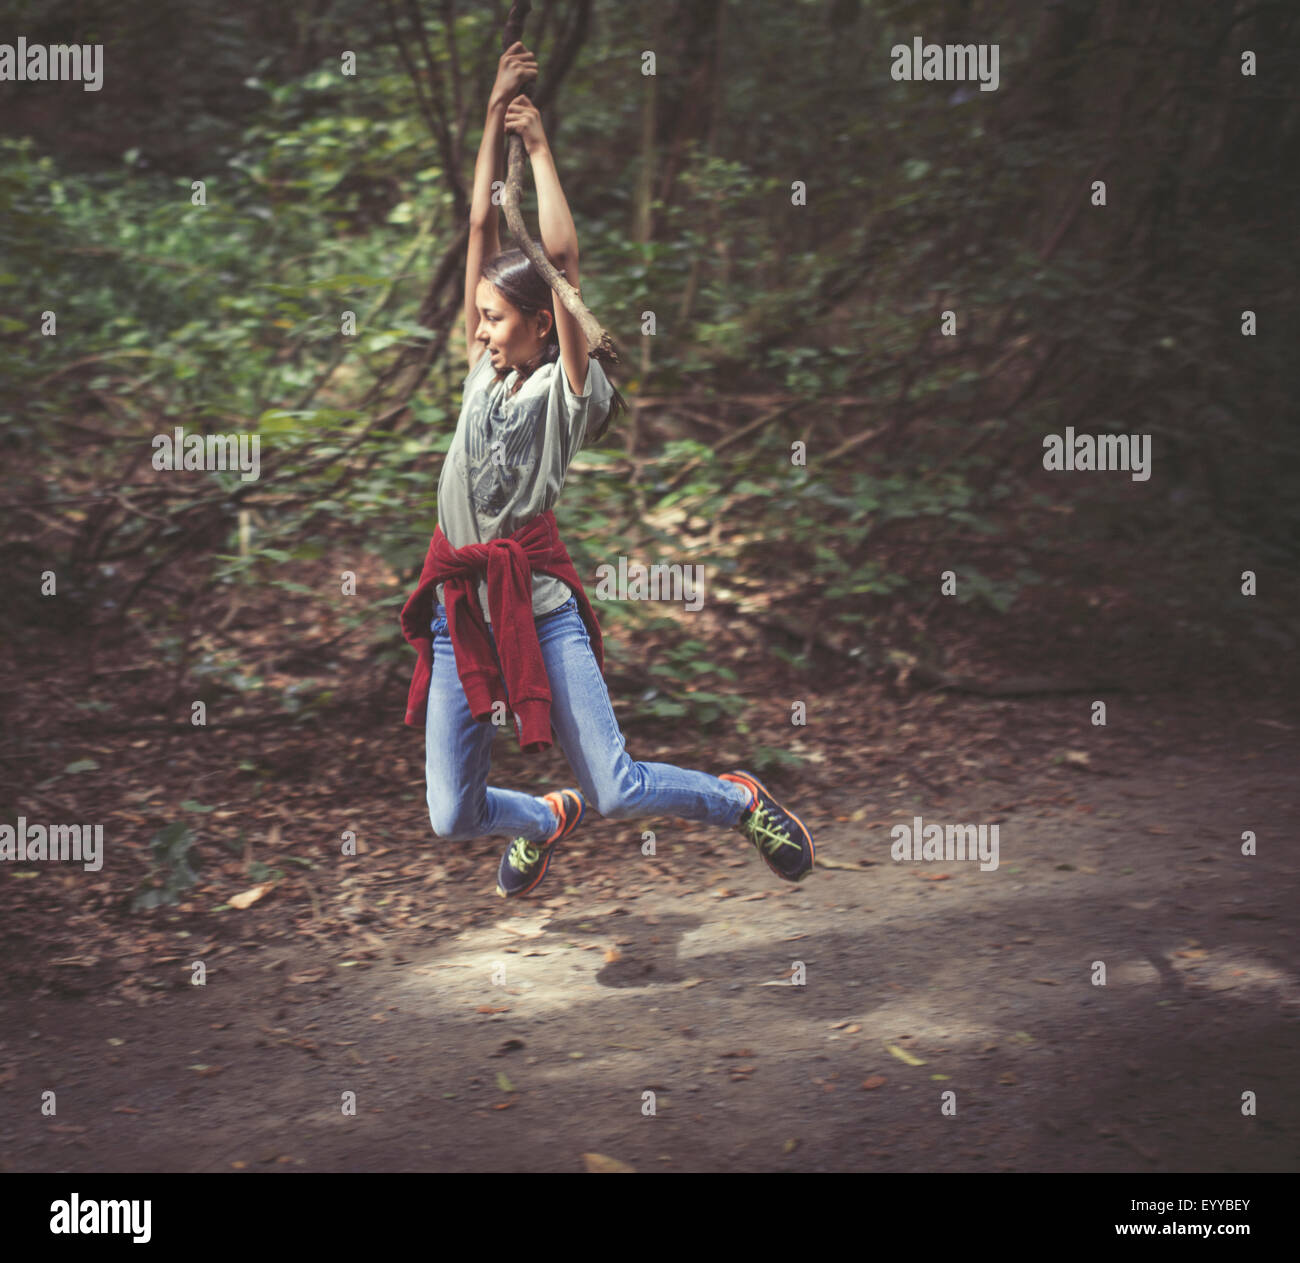 Mixed race girl swinging from tree branch on dirt path Stock Photo